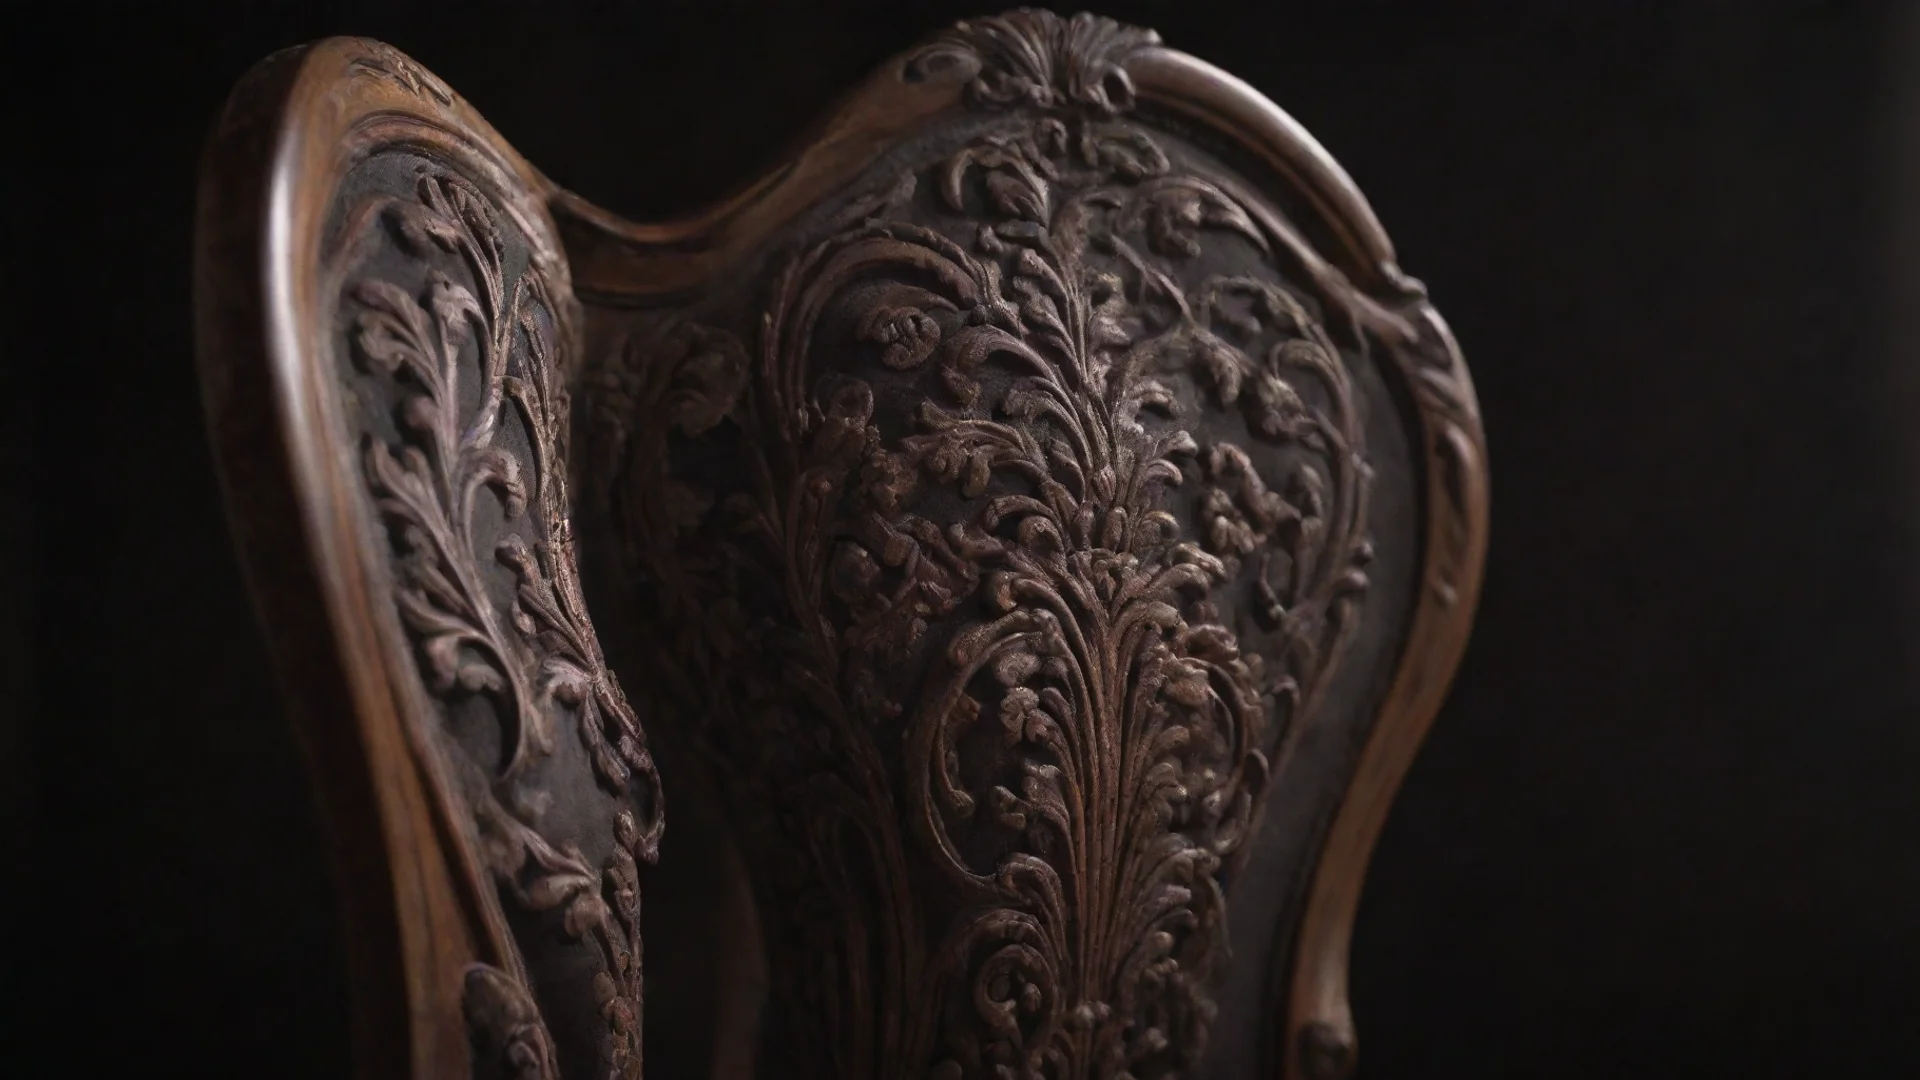 aiartstation art detail view of an ornate chair back dark brown at the edge blurred with high craftsmanship and dark background confident engaging wow 3 hdwidescreen